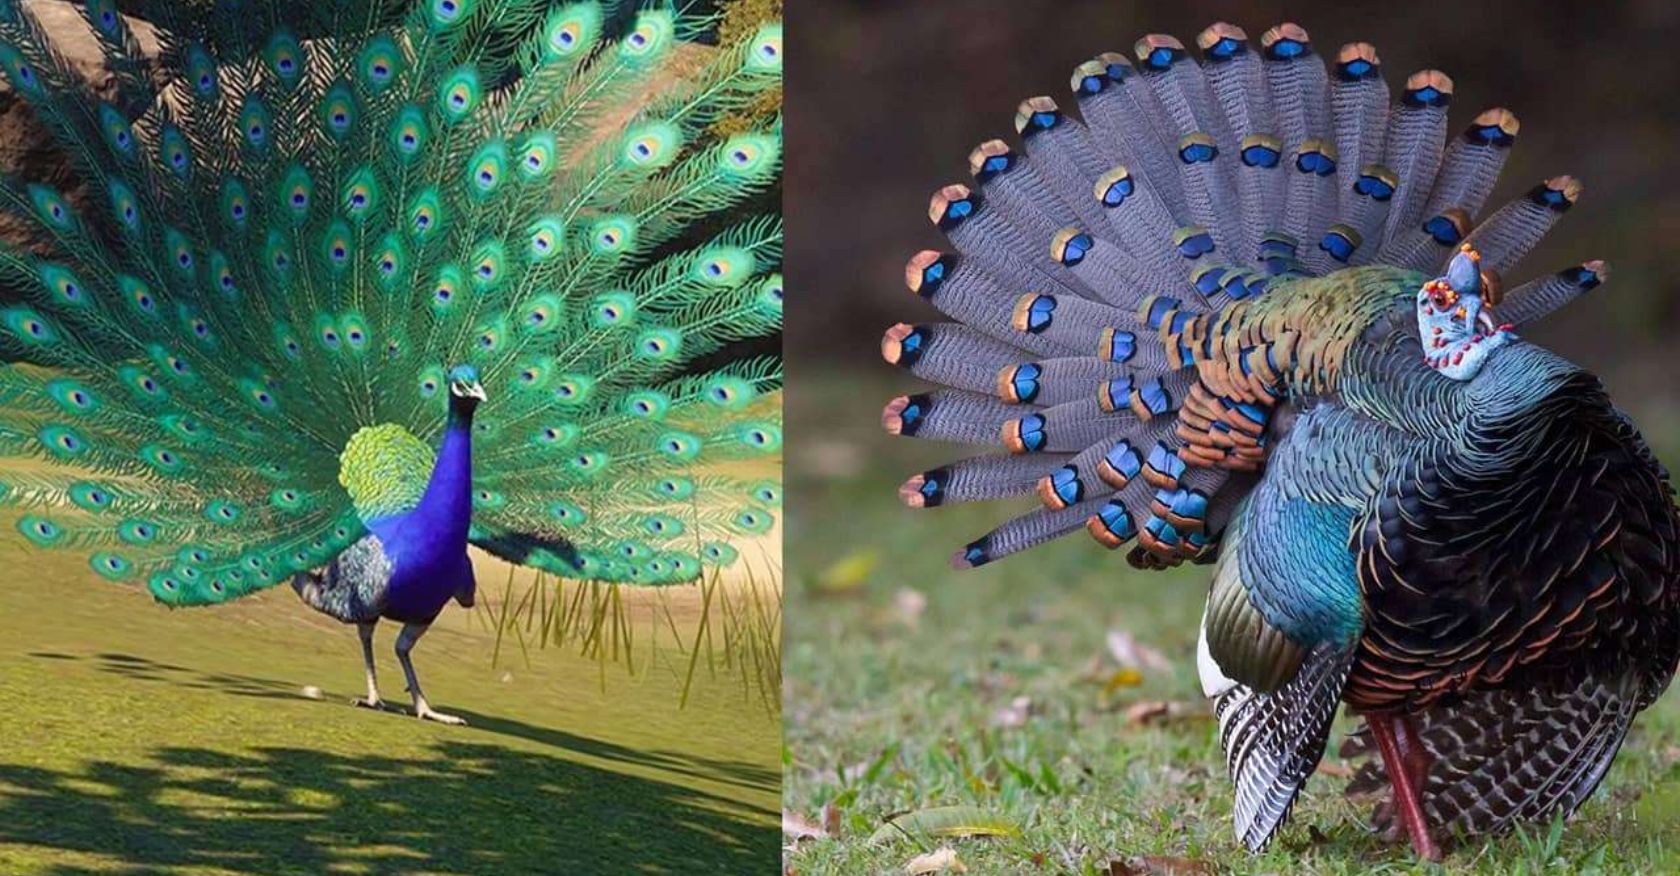 The Exquisite Majesty of the World’s Most Stunning Peacock: Adorned in Magnificent Plumage